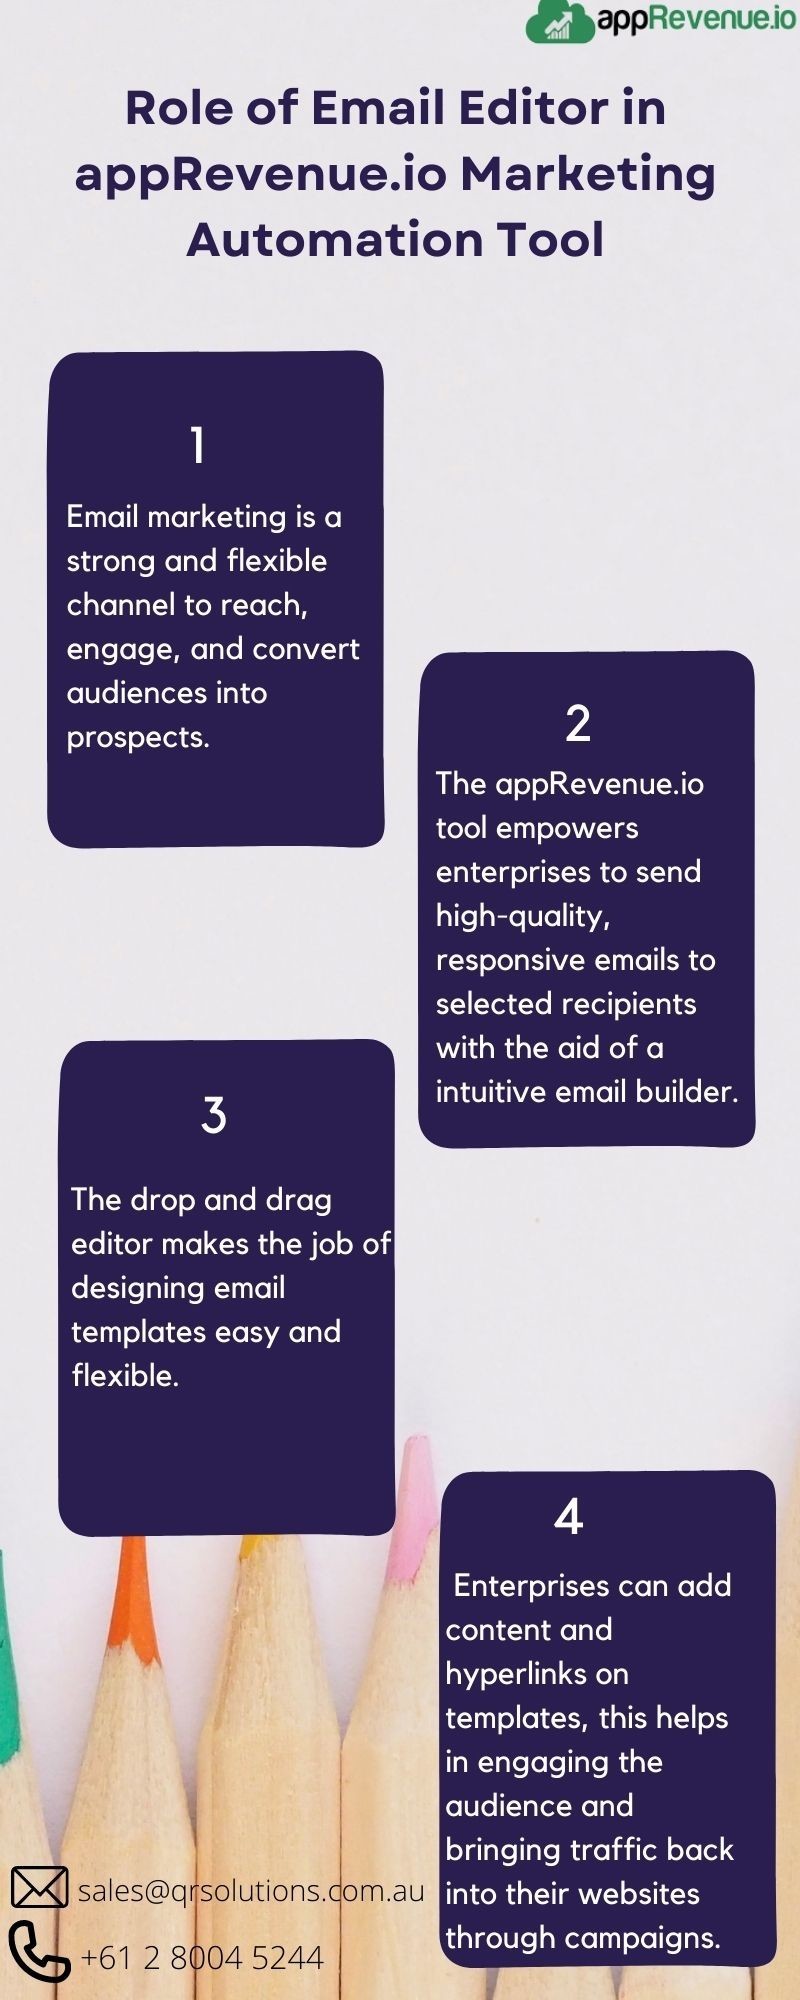 Best Marketing Automation Tool: Role of Email Editor in appRevenue.io